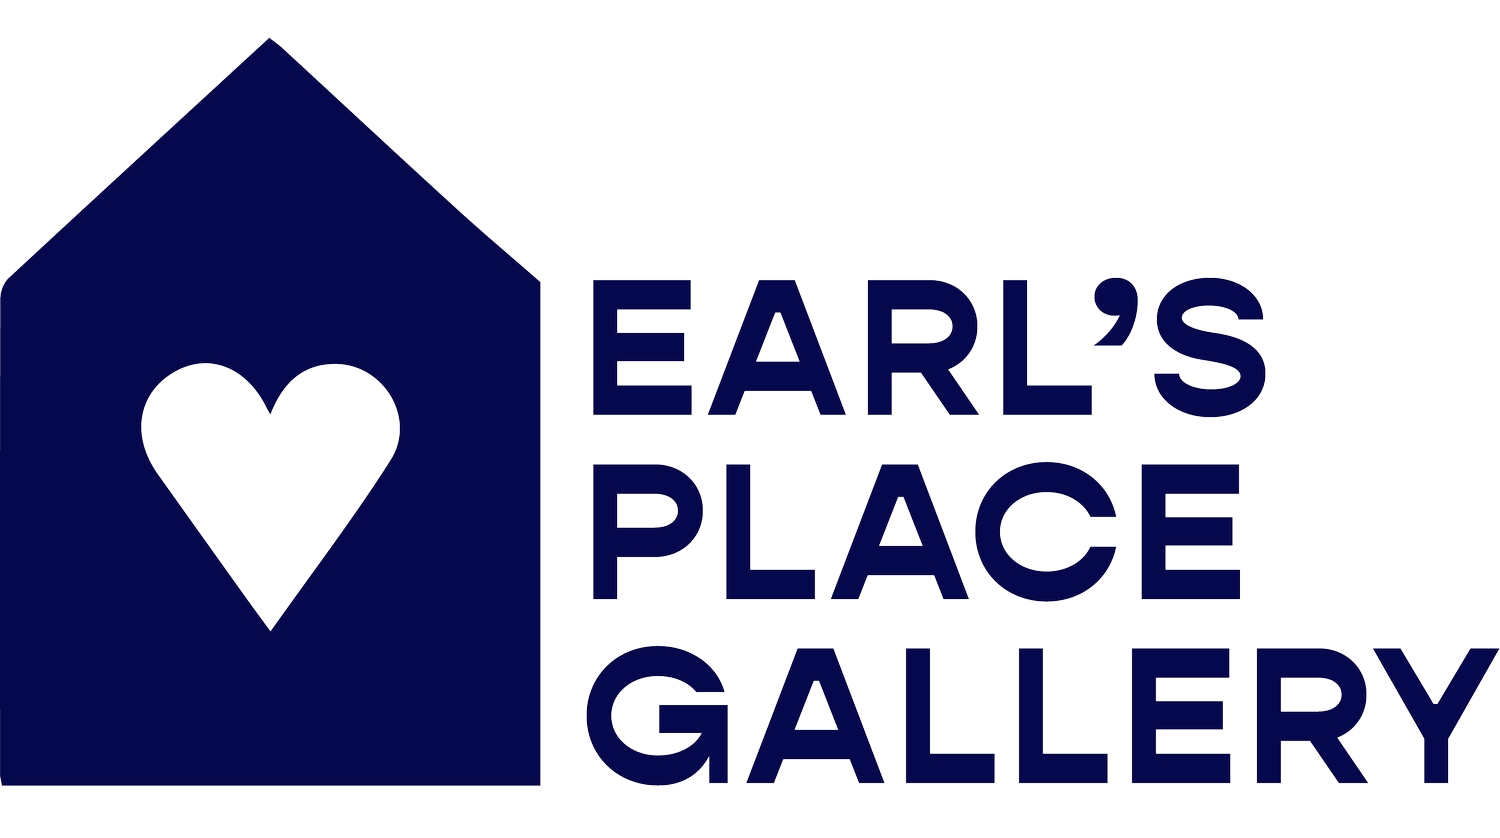 EARLS PLACE GALLERY